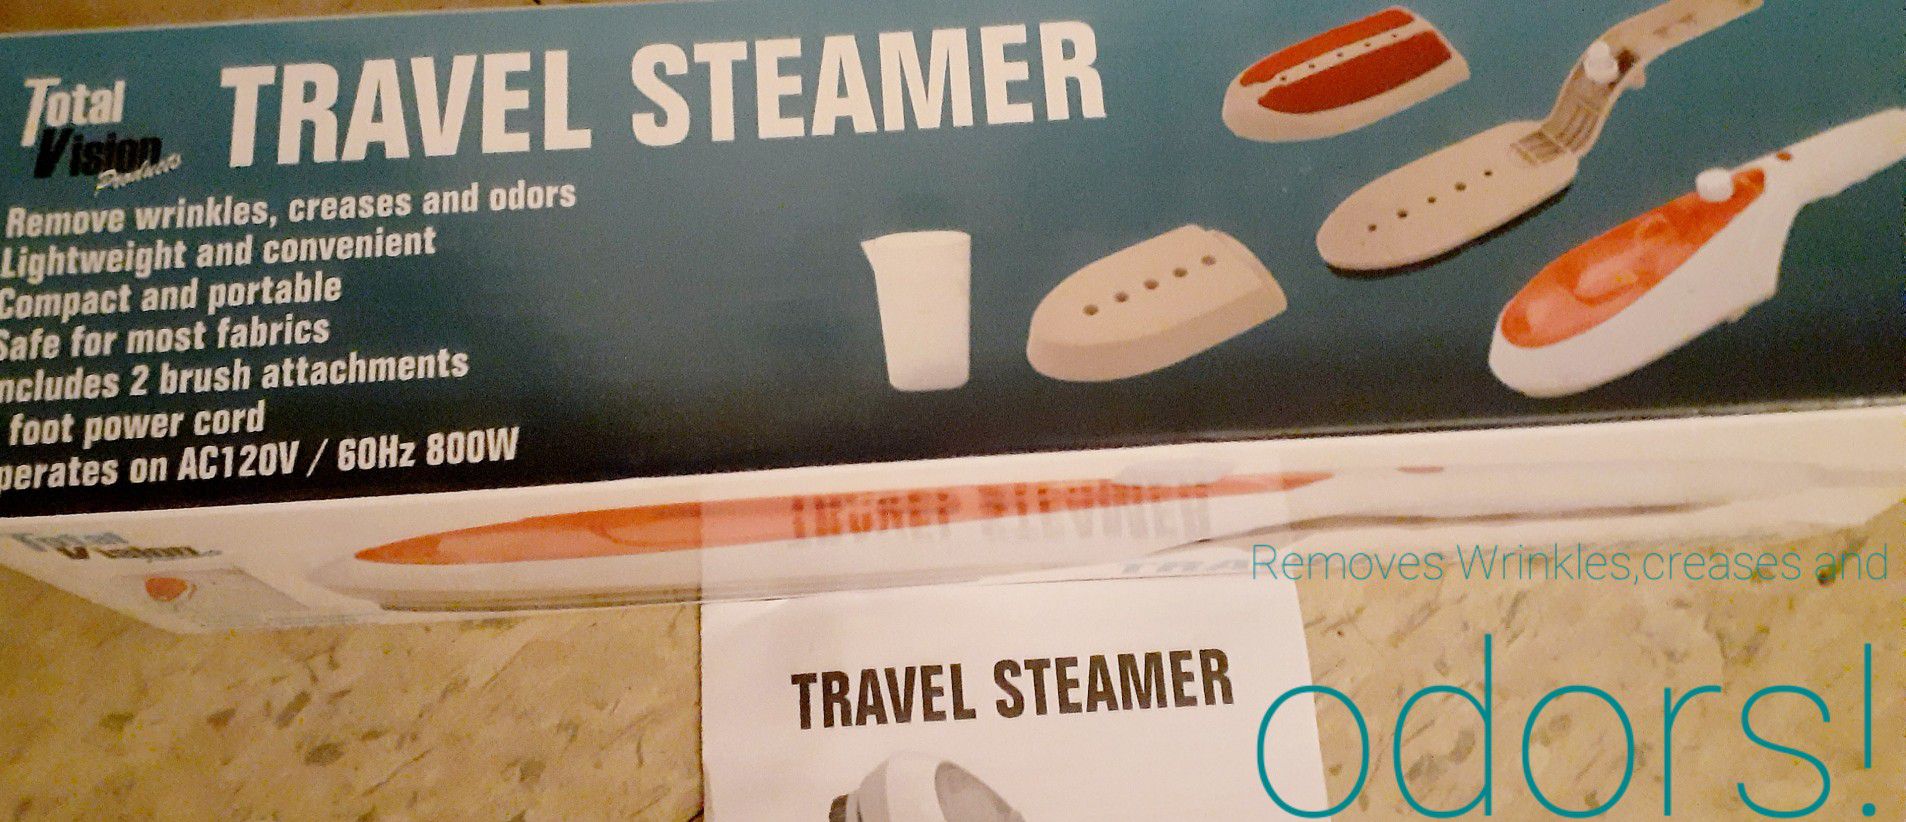 *TRAVEL STEAMER*. REMOVES WRINKLES, CREASES & ODORS! TWO BRUSH ATTACHMENTS.